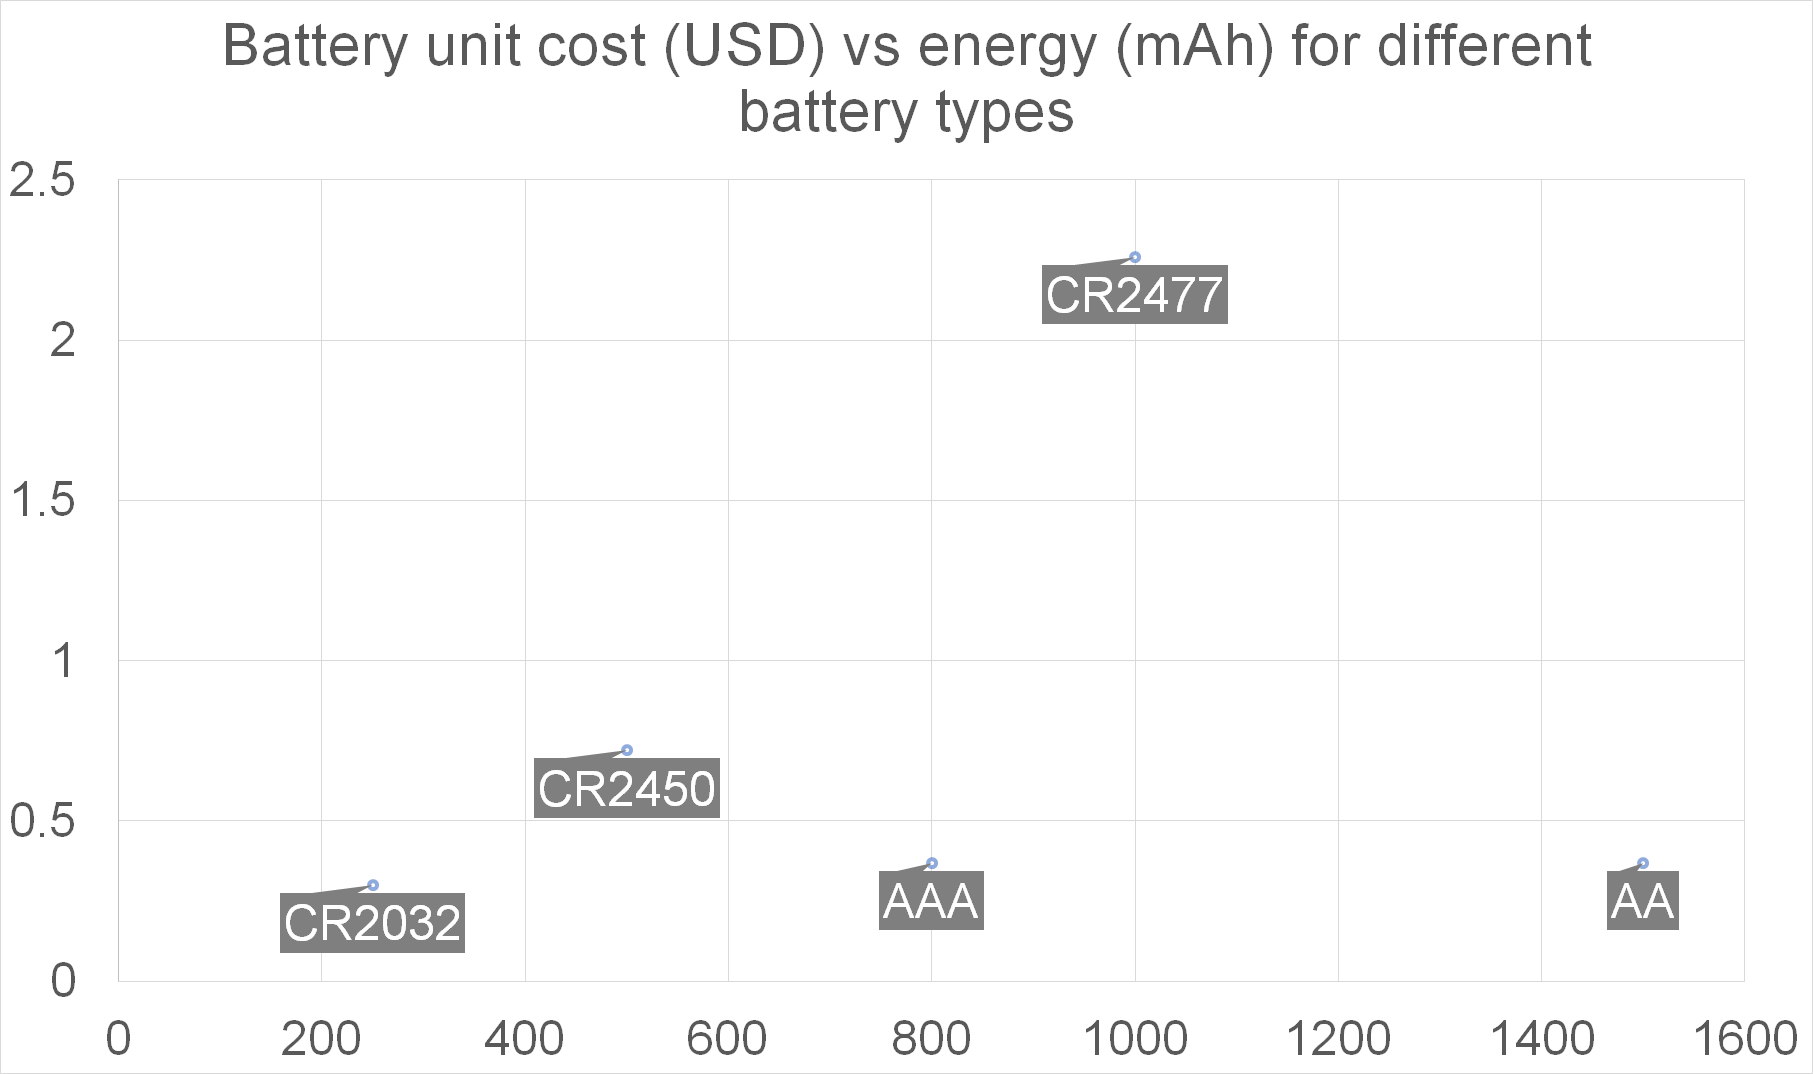 IoT battery energy vs price graph for common battery types: CR2032, CR2450, CR2477, AAA, AA